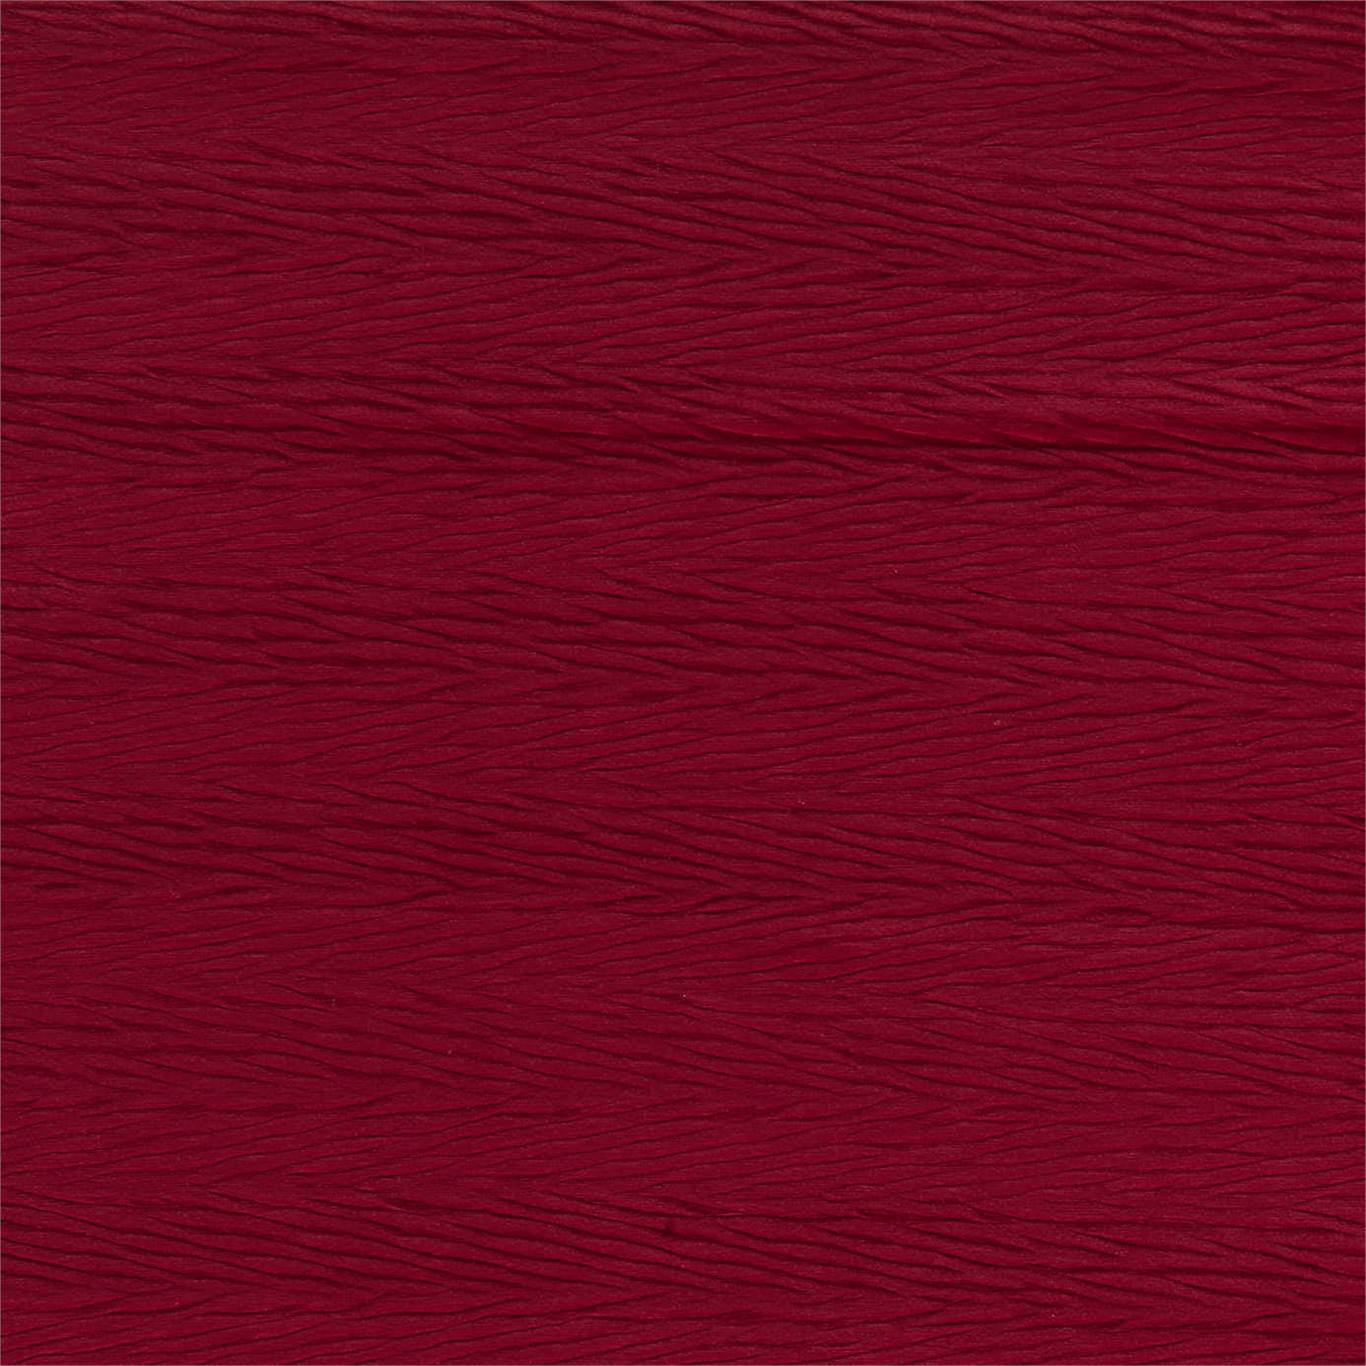 Florio Claret Fabric by HAR